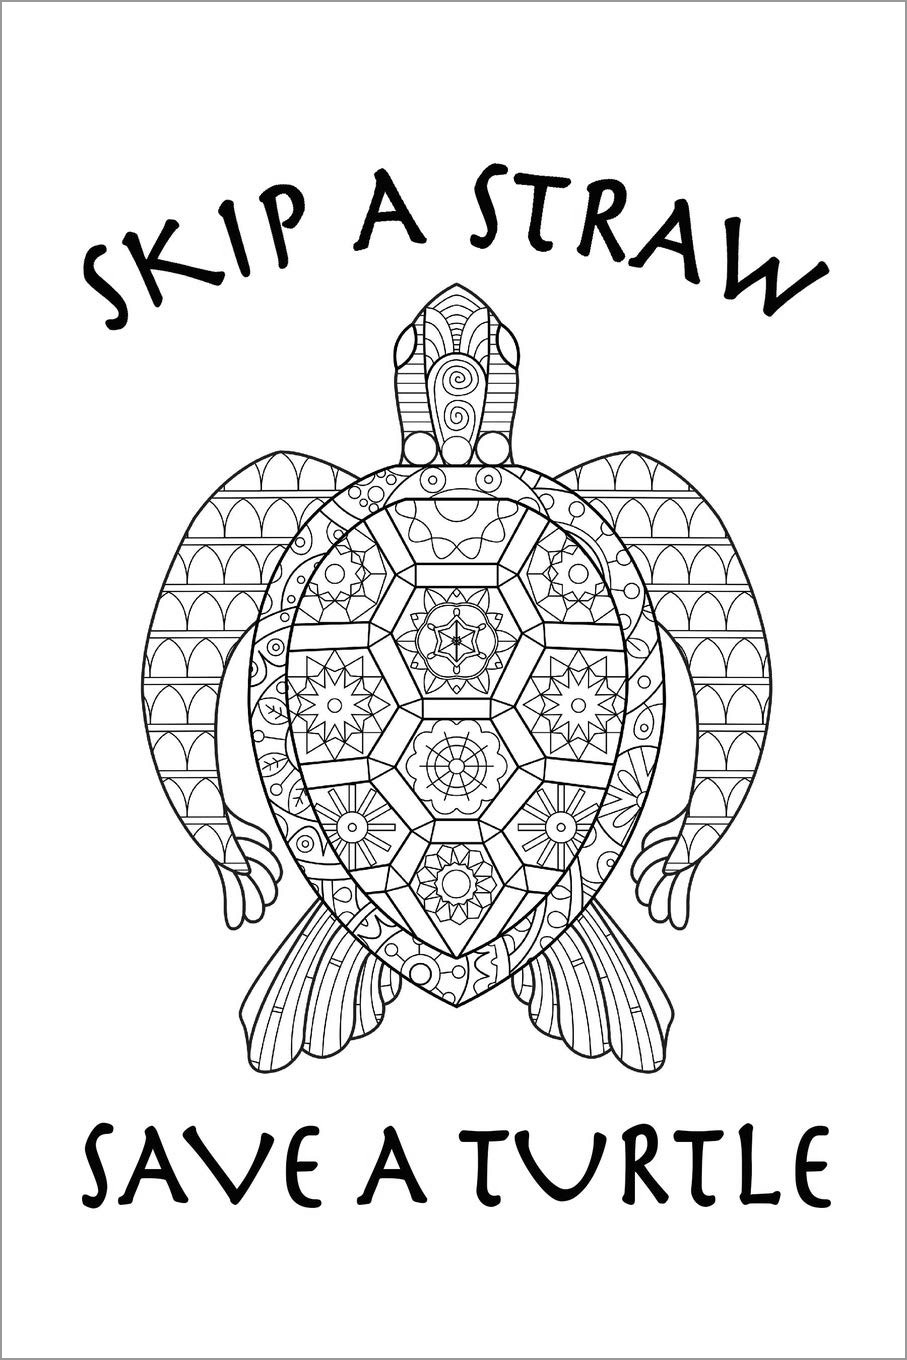 Skip A Straw Save A Turtle Coloring Page